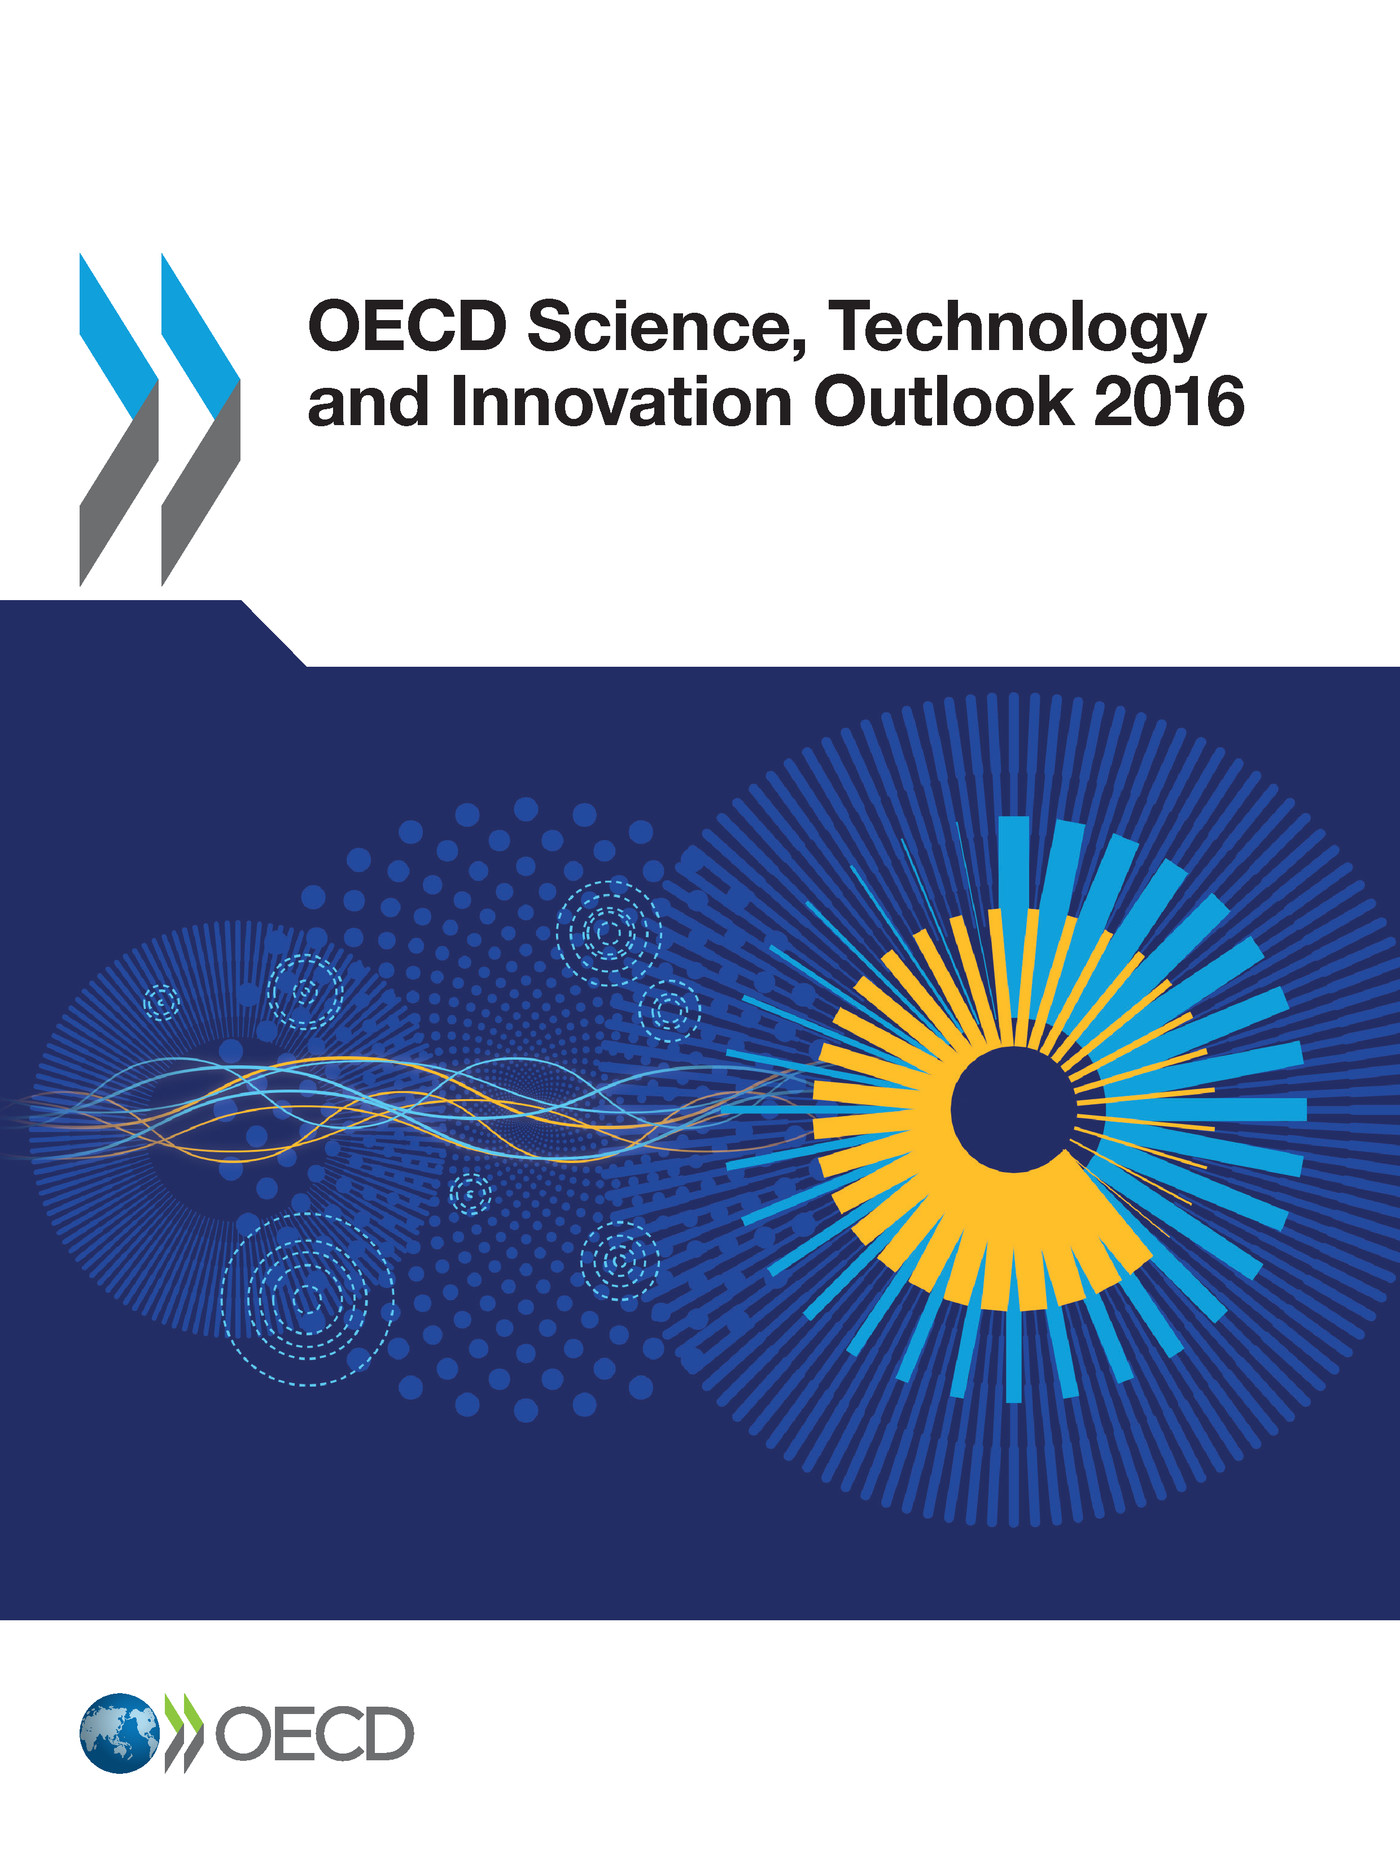 OECD Science, Technology and Innovation Outlook 2016 -  Collectif - OCDE / OECD